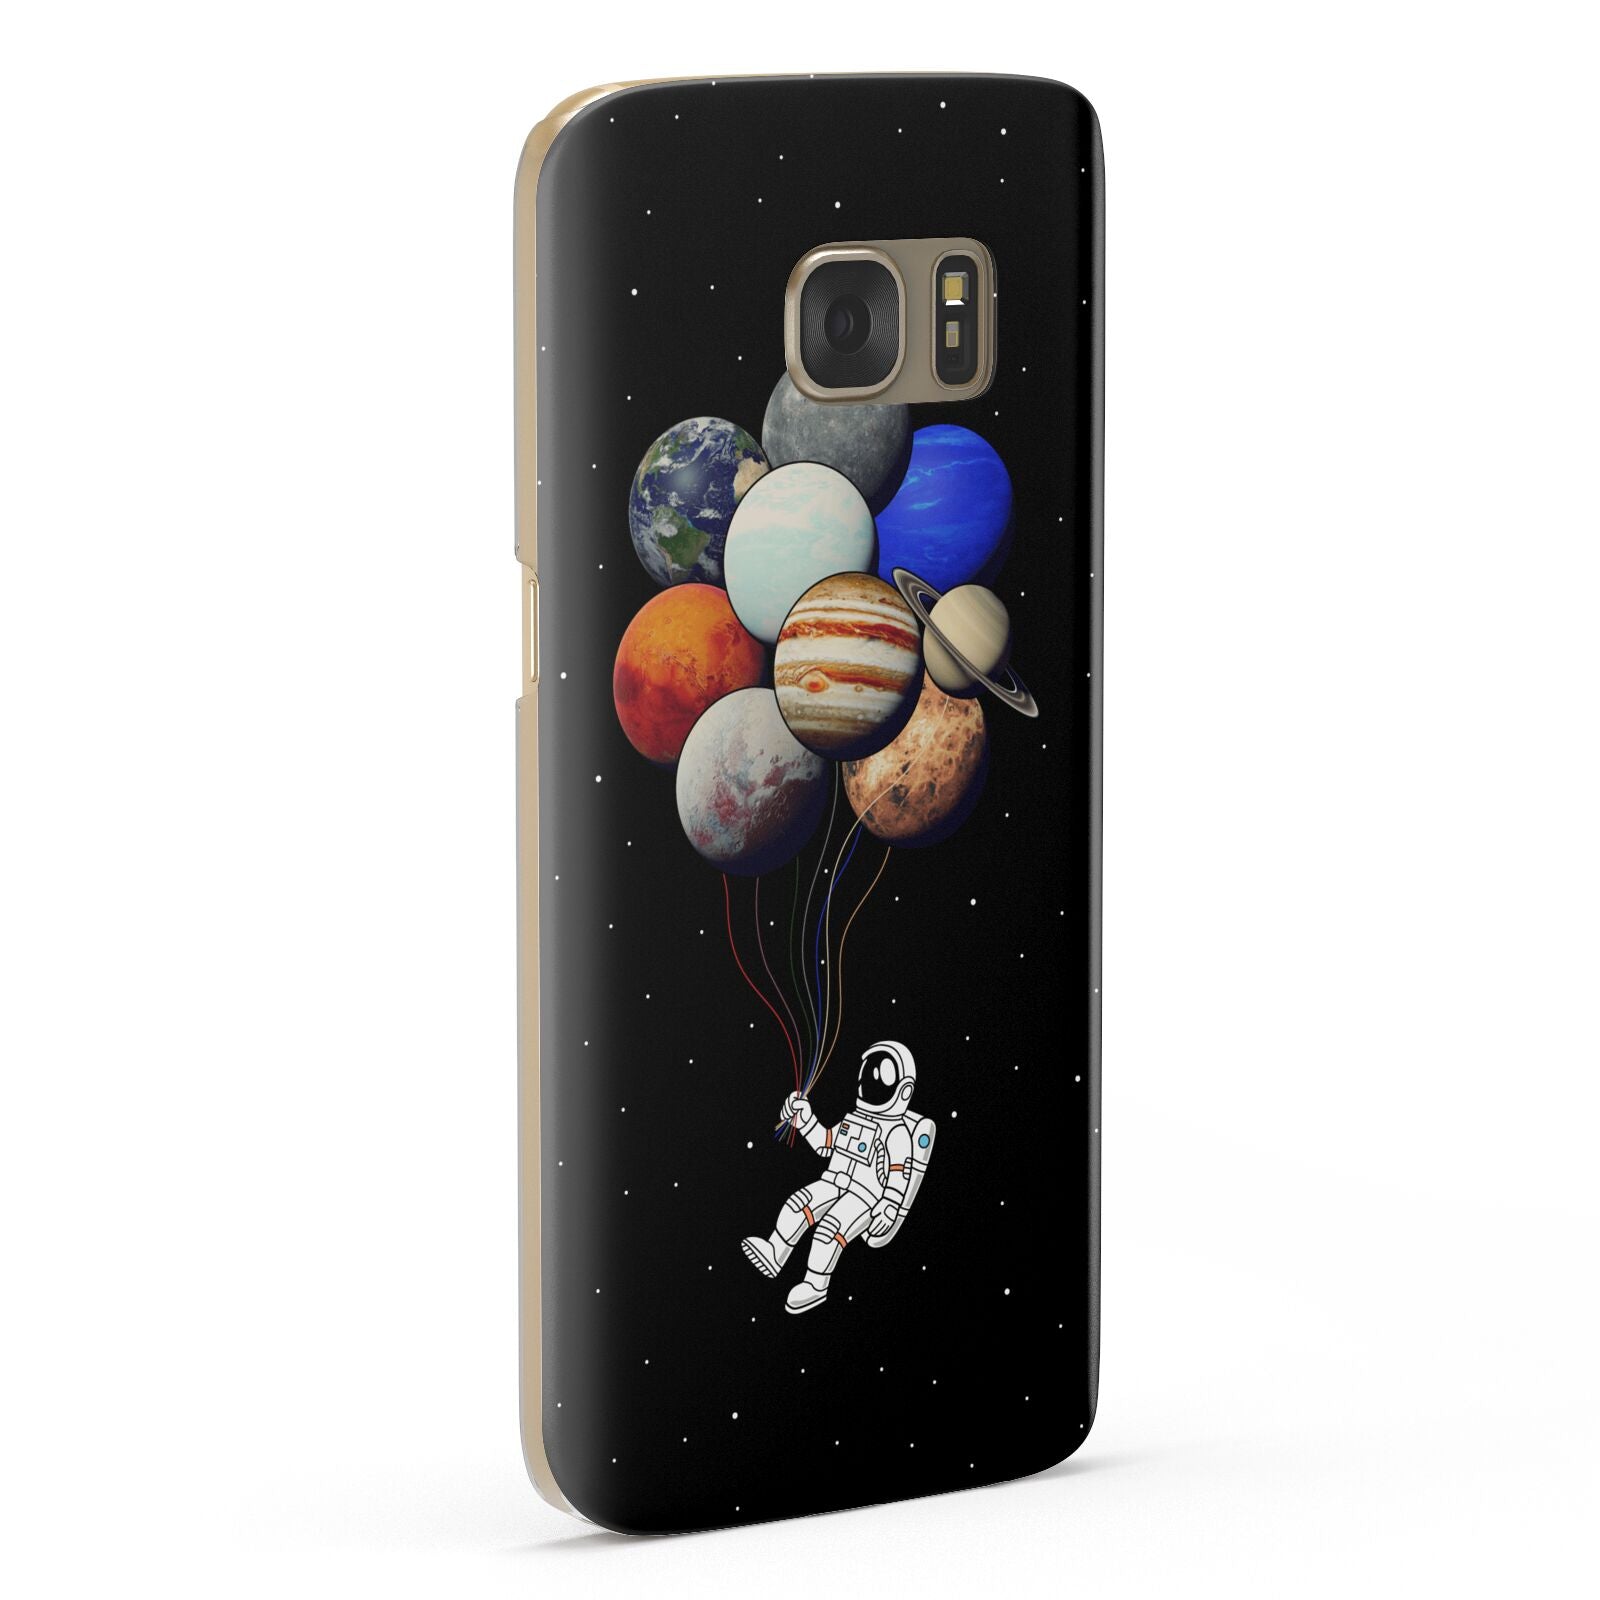 Astronaut Planet Balloons Samsung Galaxy Case Fourty Five Degrees